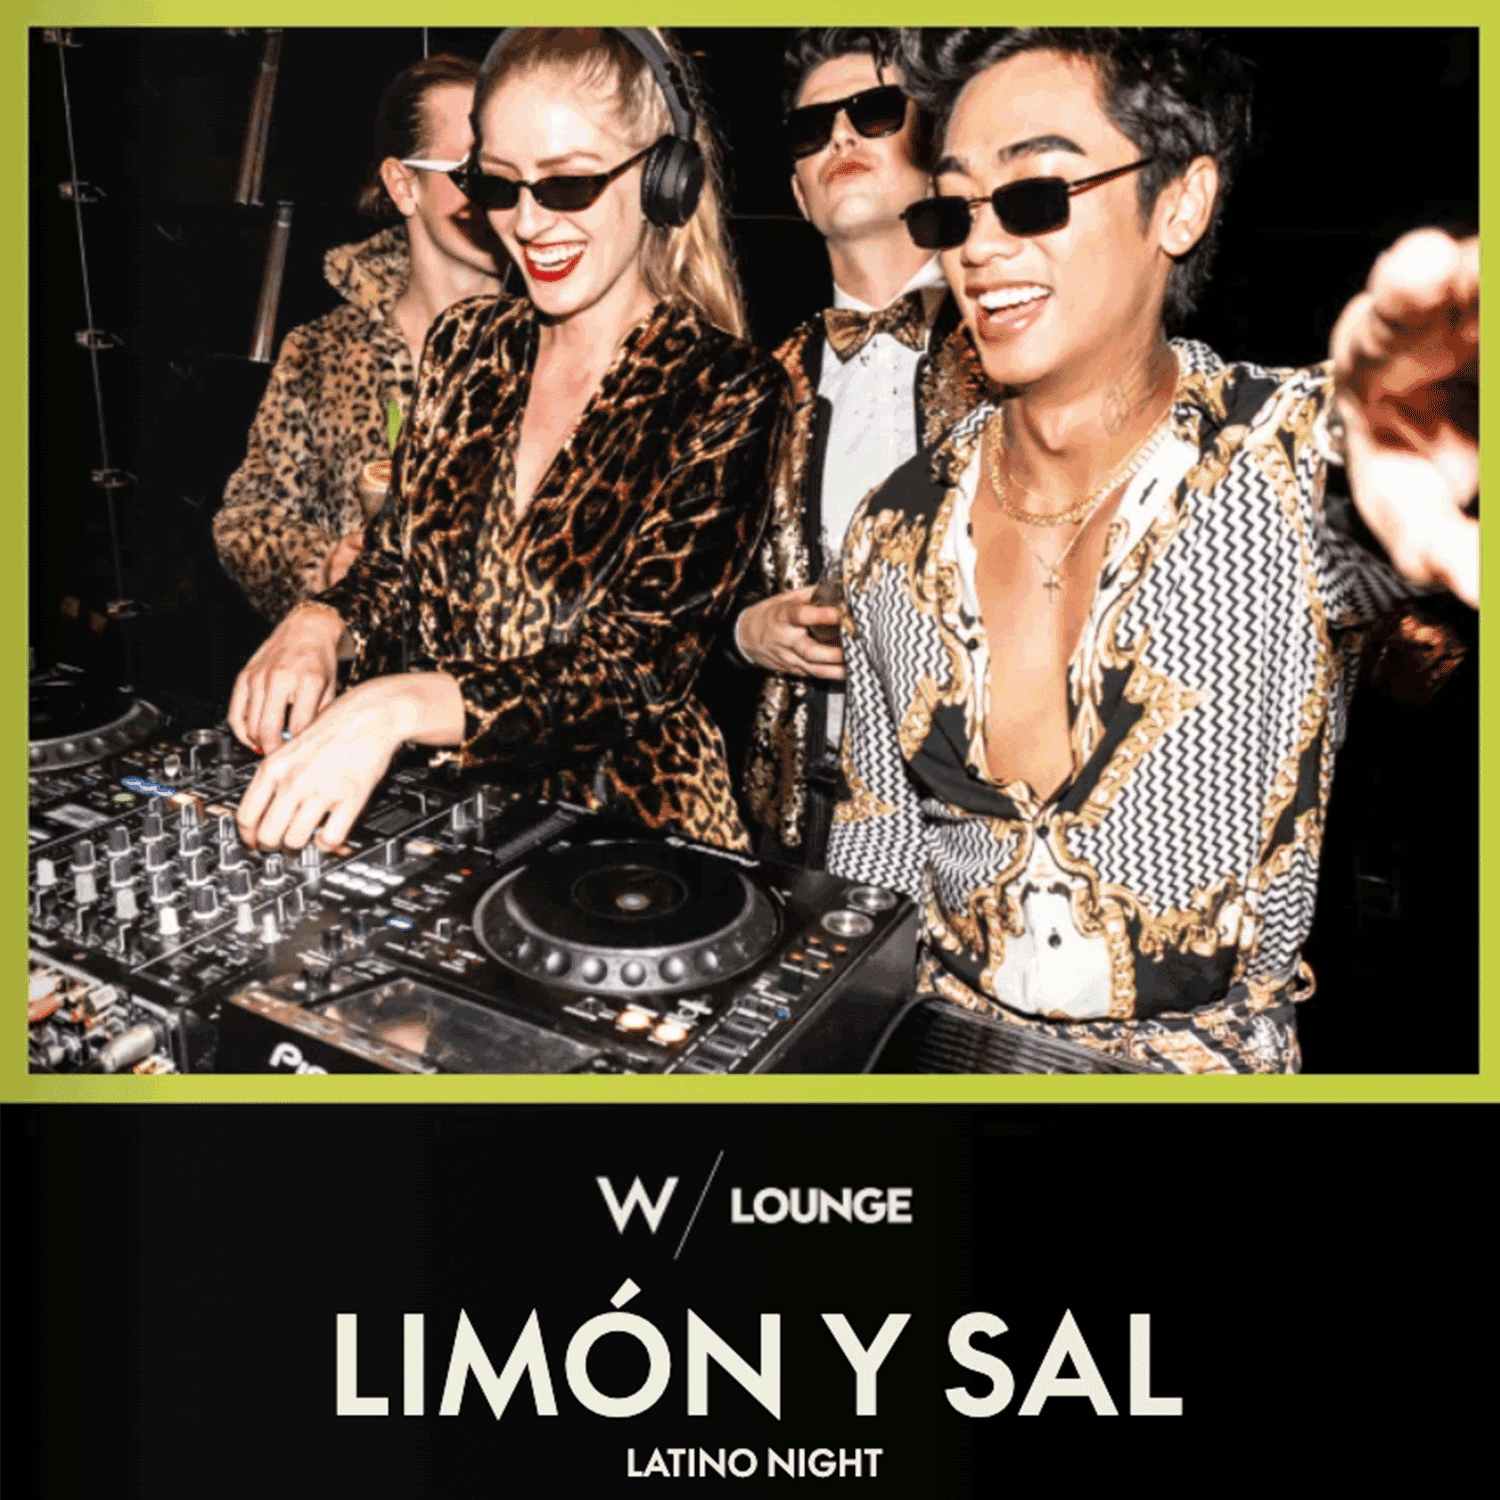 LIMÓN Y SAL AT W LOUNGE